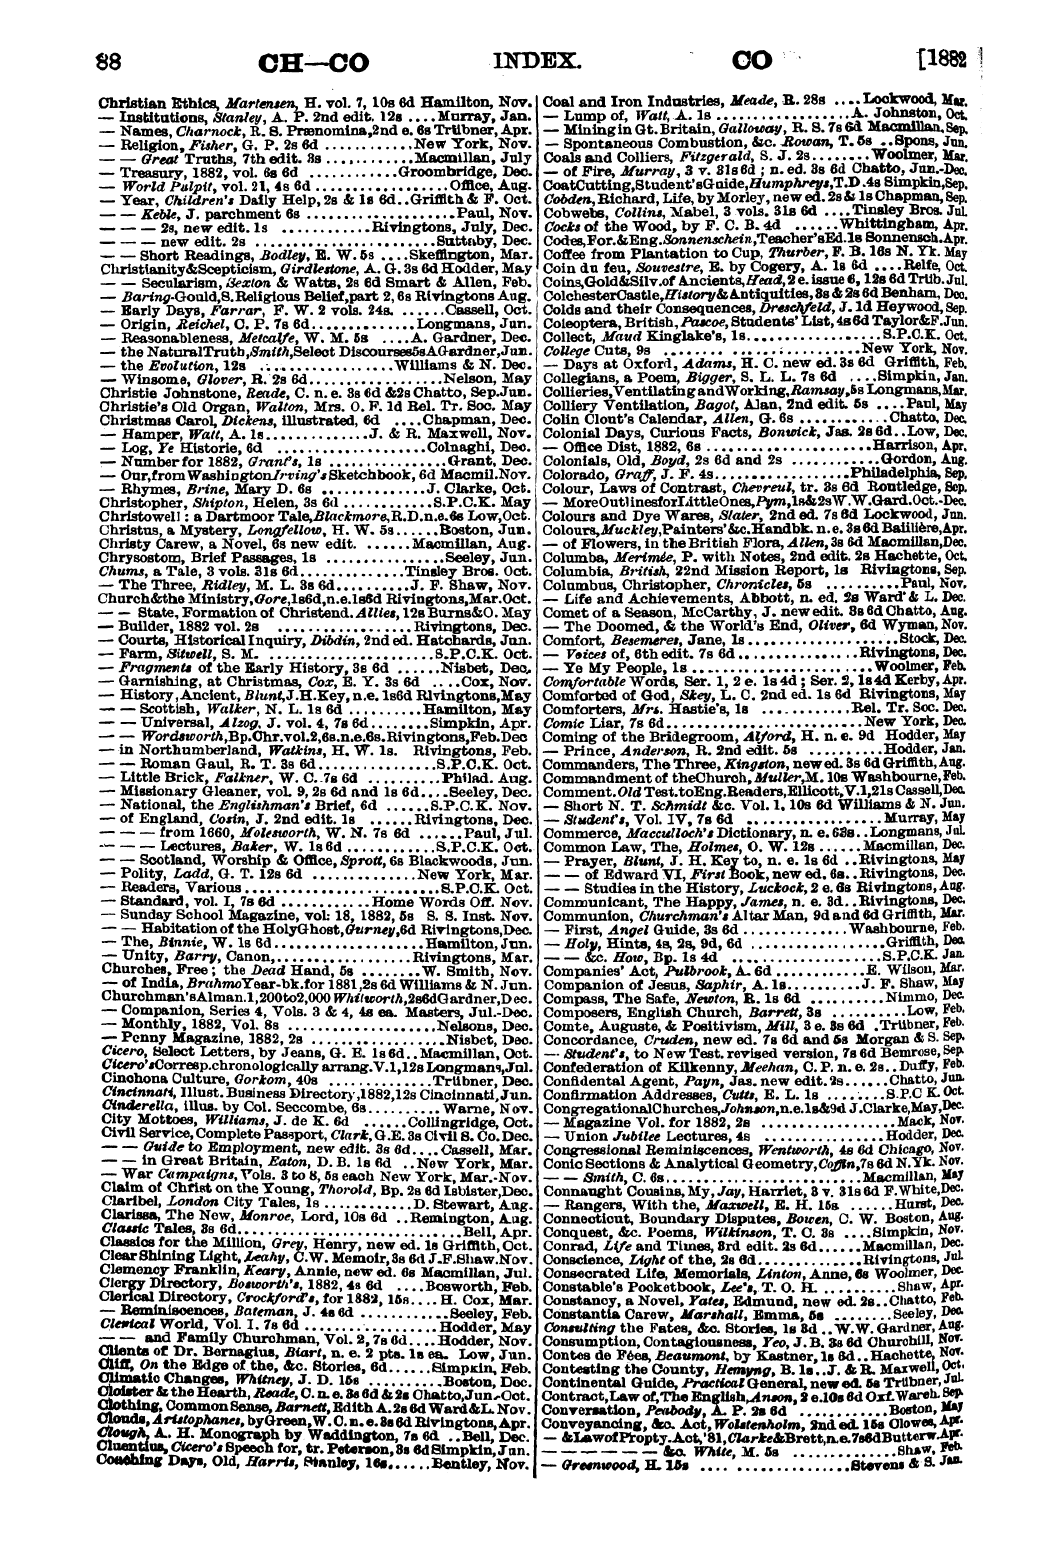 Publishers’ Circular (1880-1890): jS F Y, 1st edition - Untitled Article